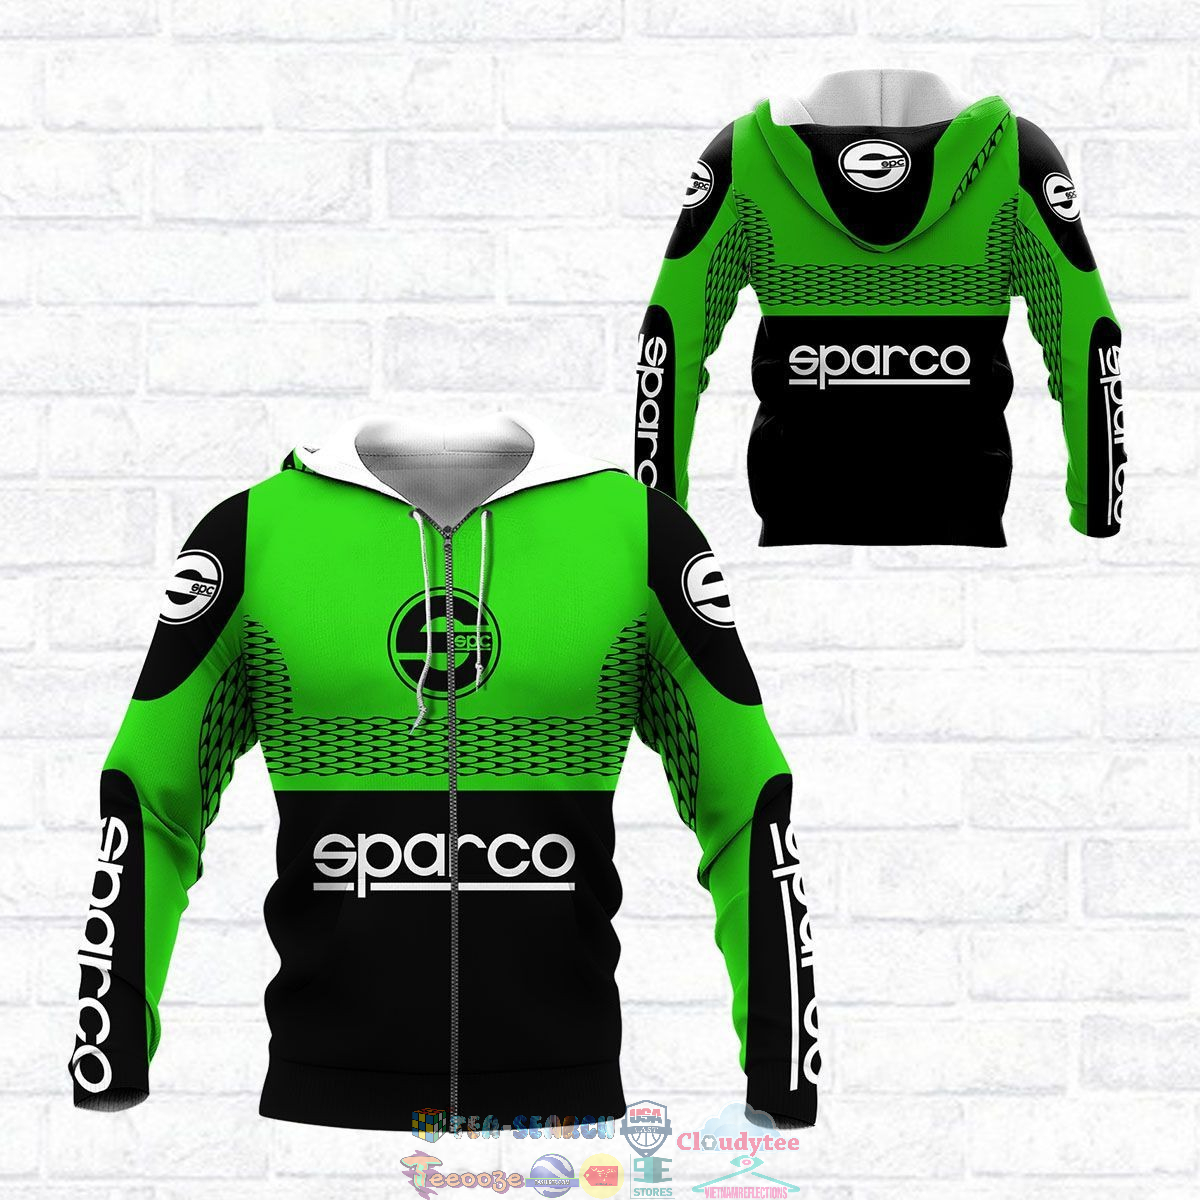 Sparco ver 49 3D hoodie and t-shirt